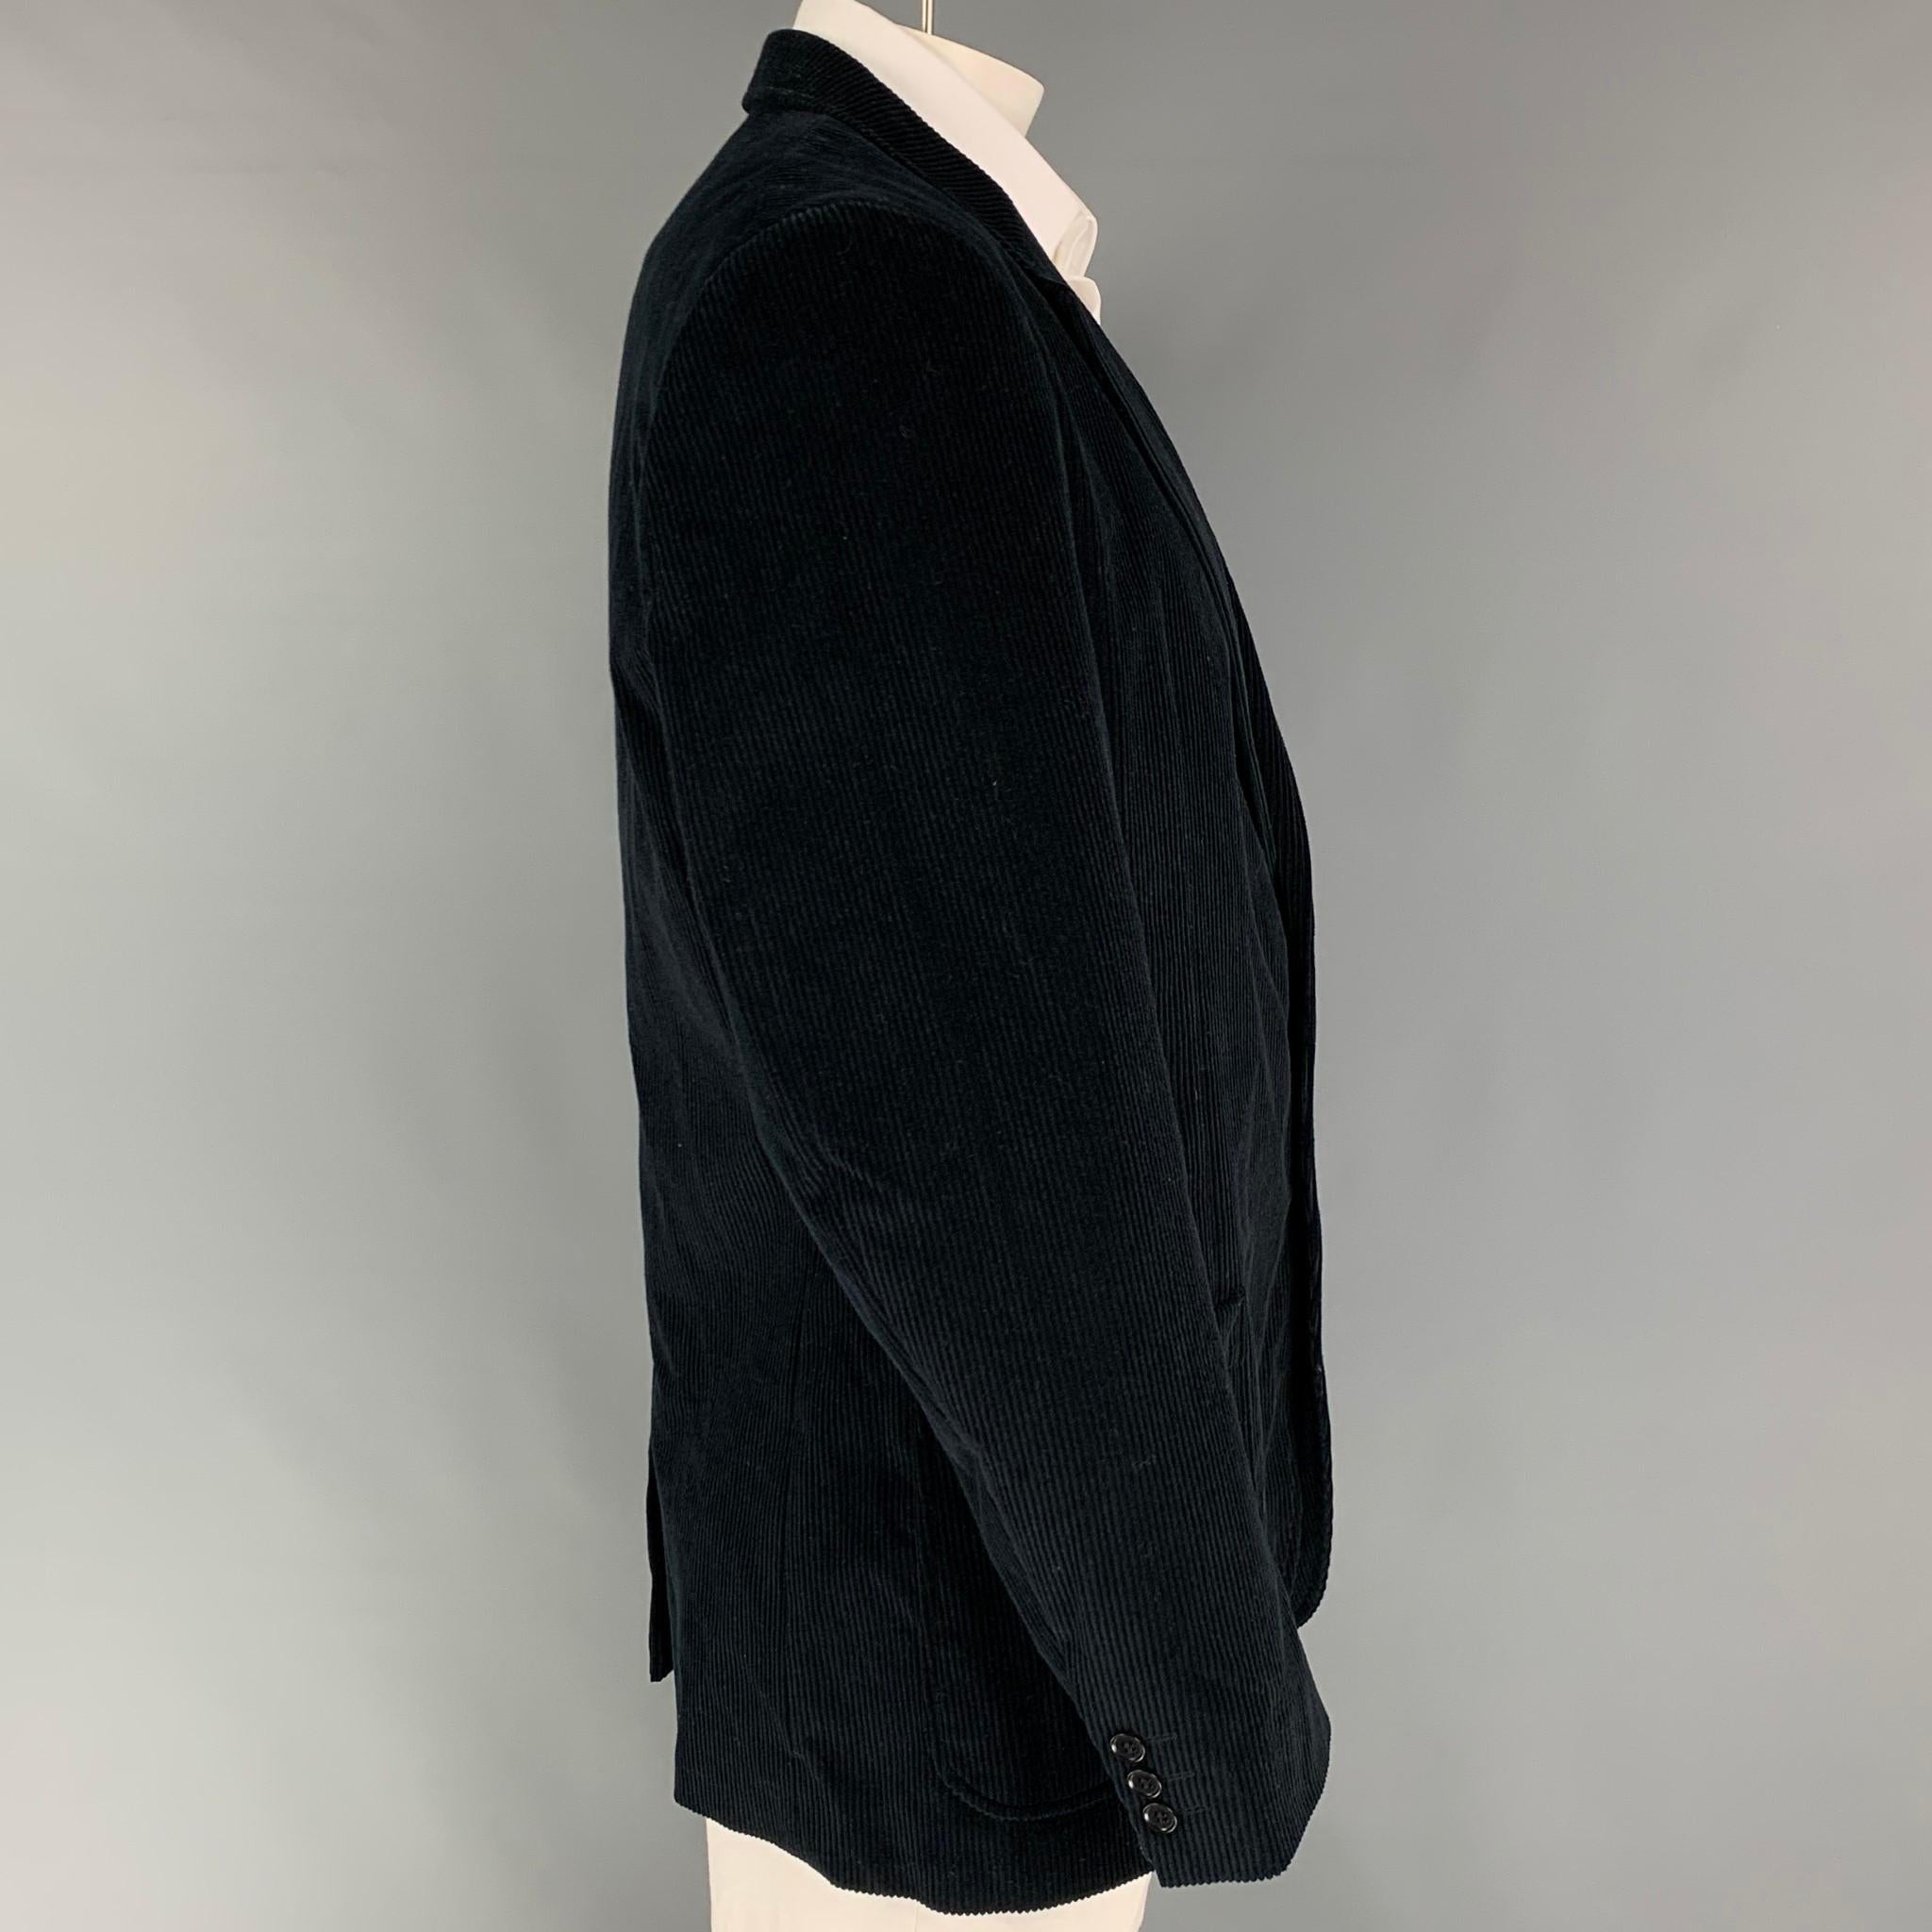 CALVIN KLEIN sport coat comes in a black corduroy cotton with a full liner featuring a notch lapel, patch pockets, single back vent, and a double button closure. Made in Italy. 

Very Good Pre-Owned Condition.
Marked: